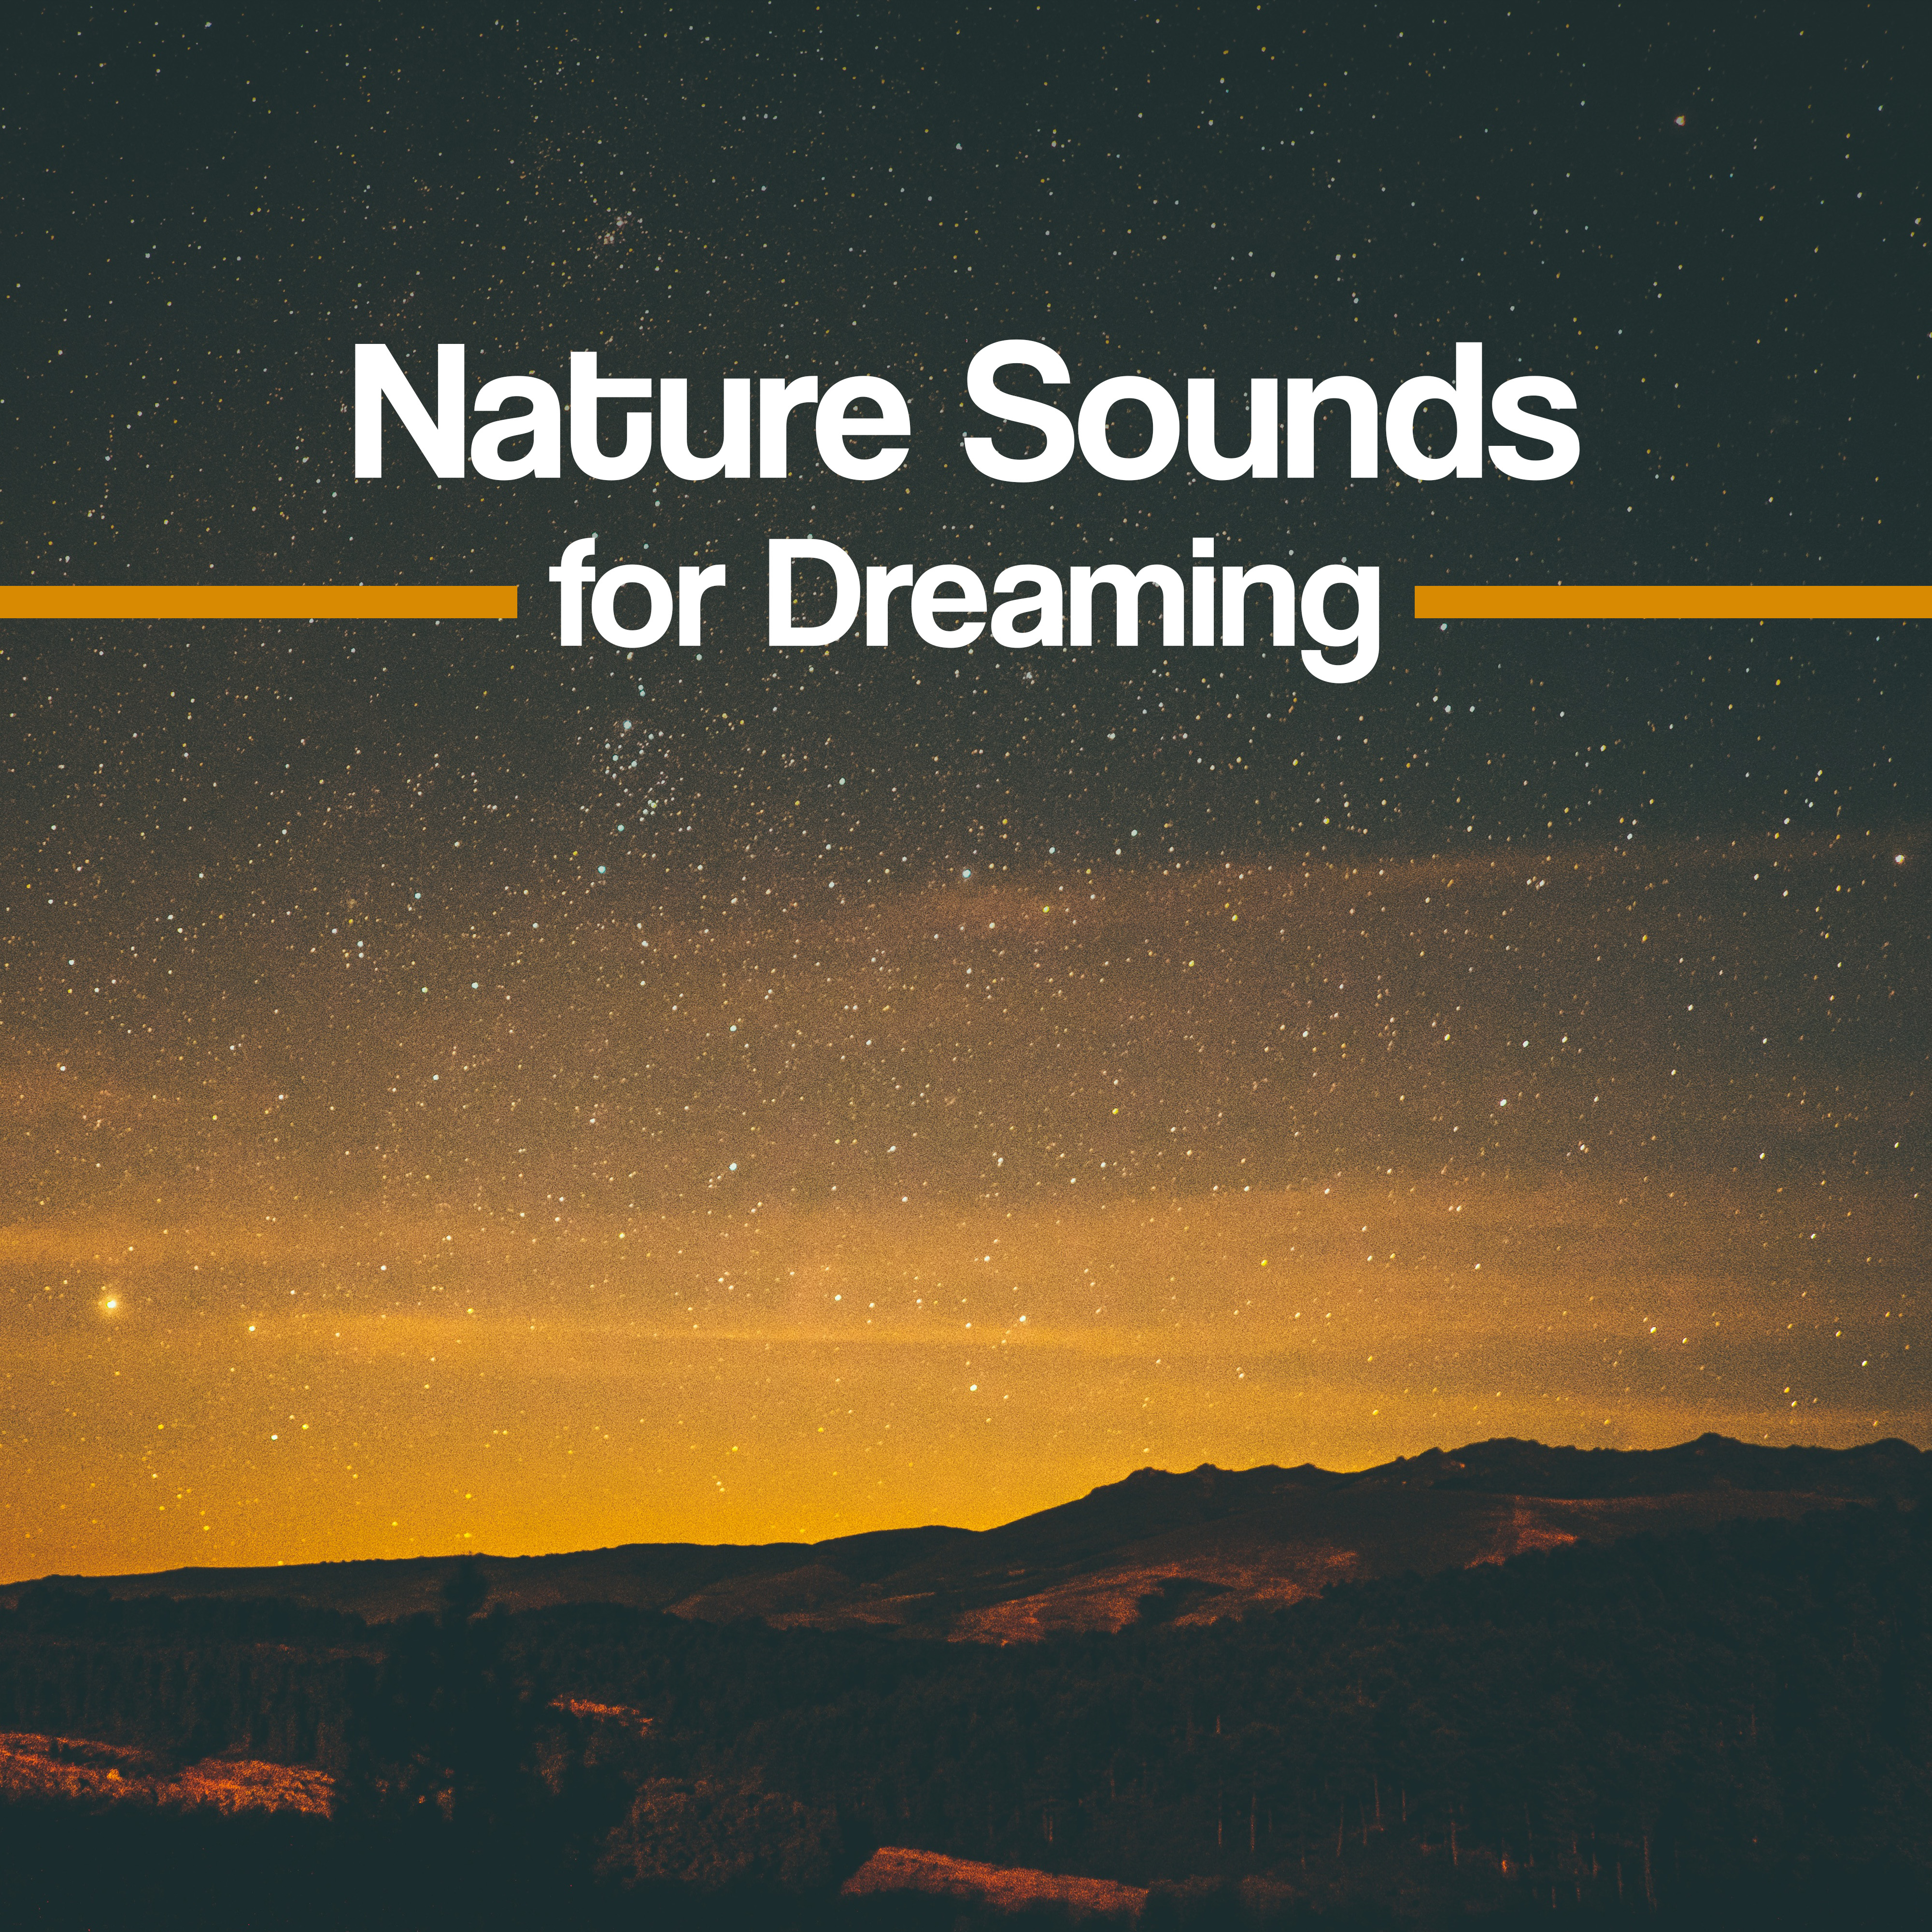 Nature Sounds for Dreaming  Calming Waves, Music to Rest, Sleep All Night, Waves of Calmness